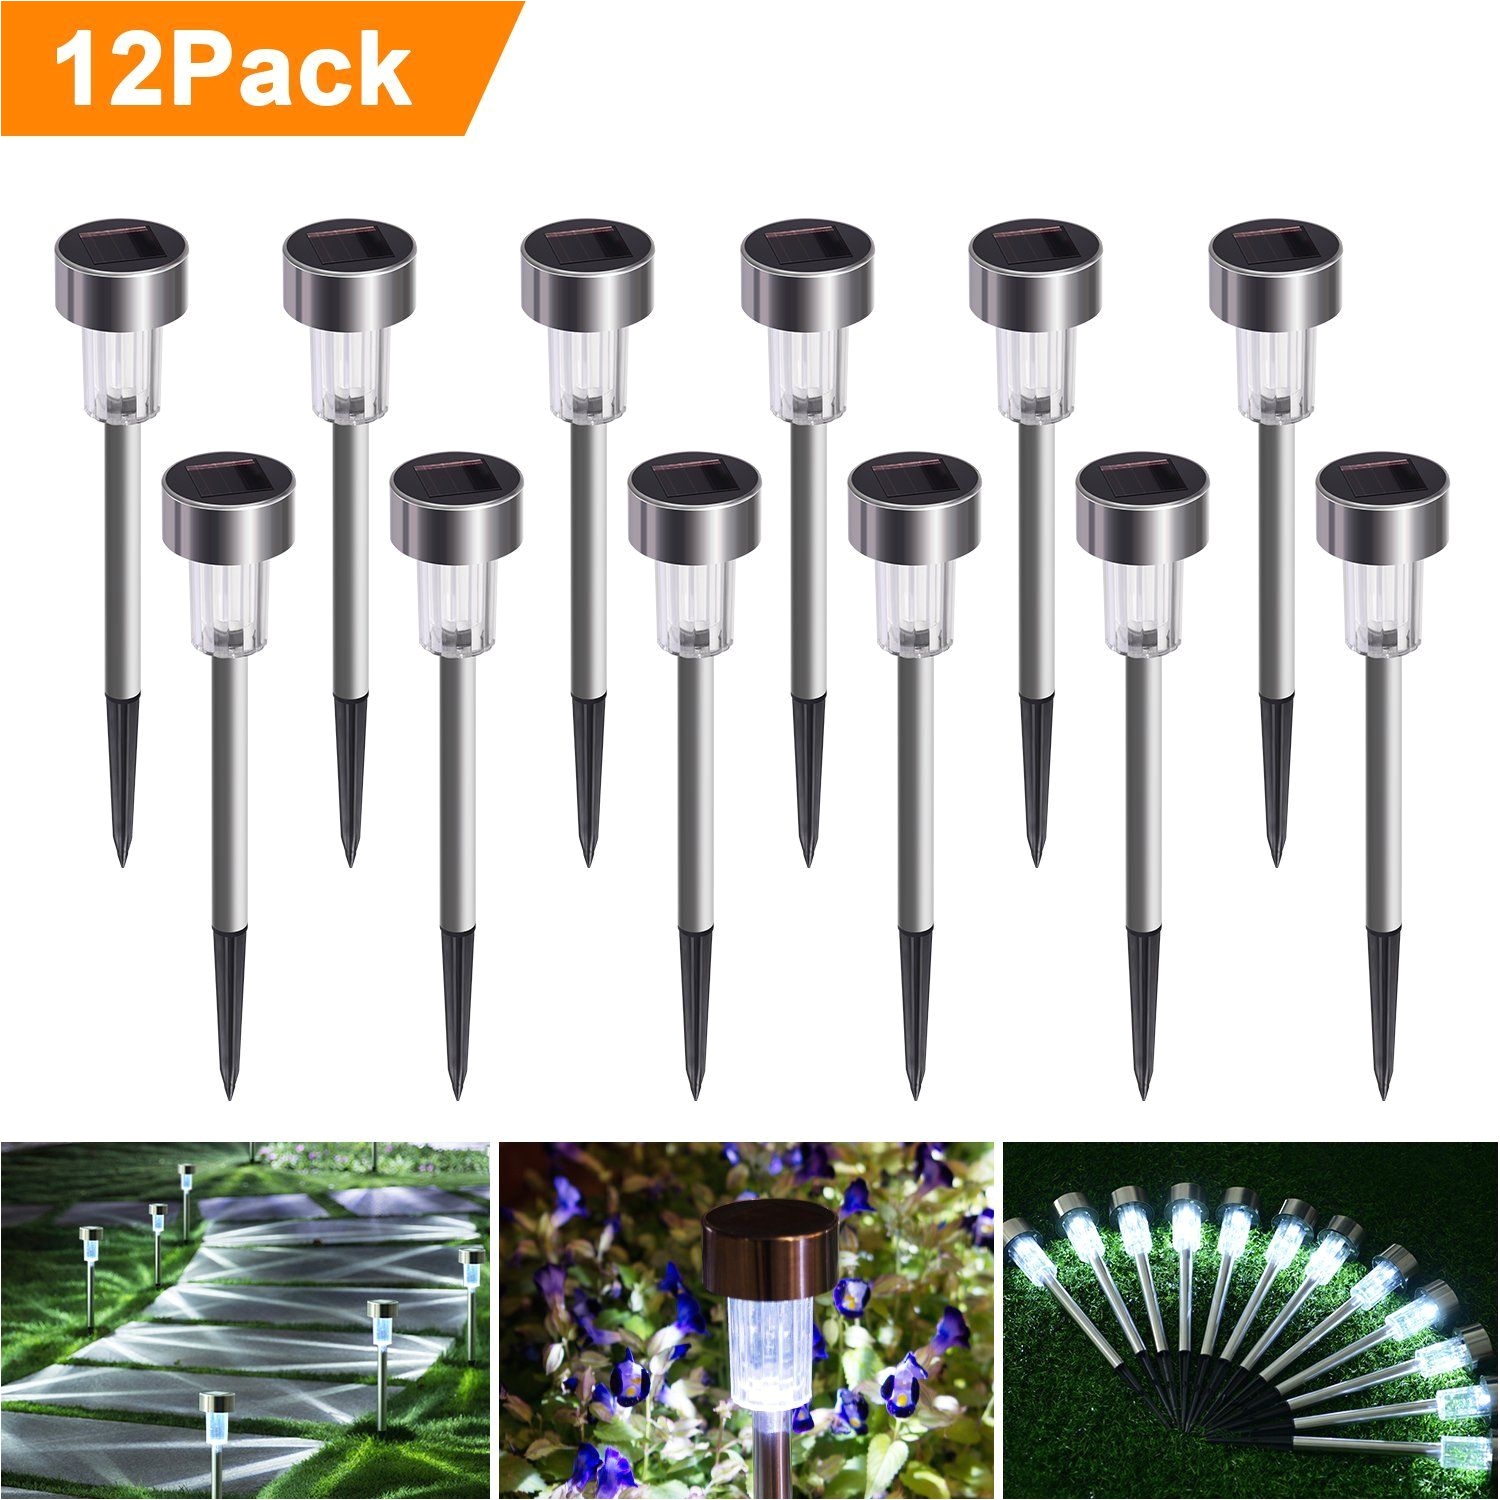 sunnest solar garden lights outdoor 12pack stainless steel solar pathway lights outdoor landscape lighting for lawn patio yard walkway driveway sg t9285